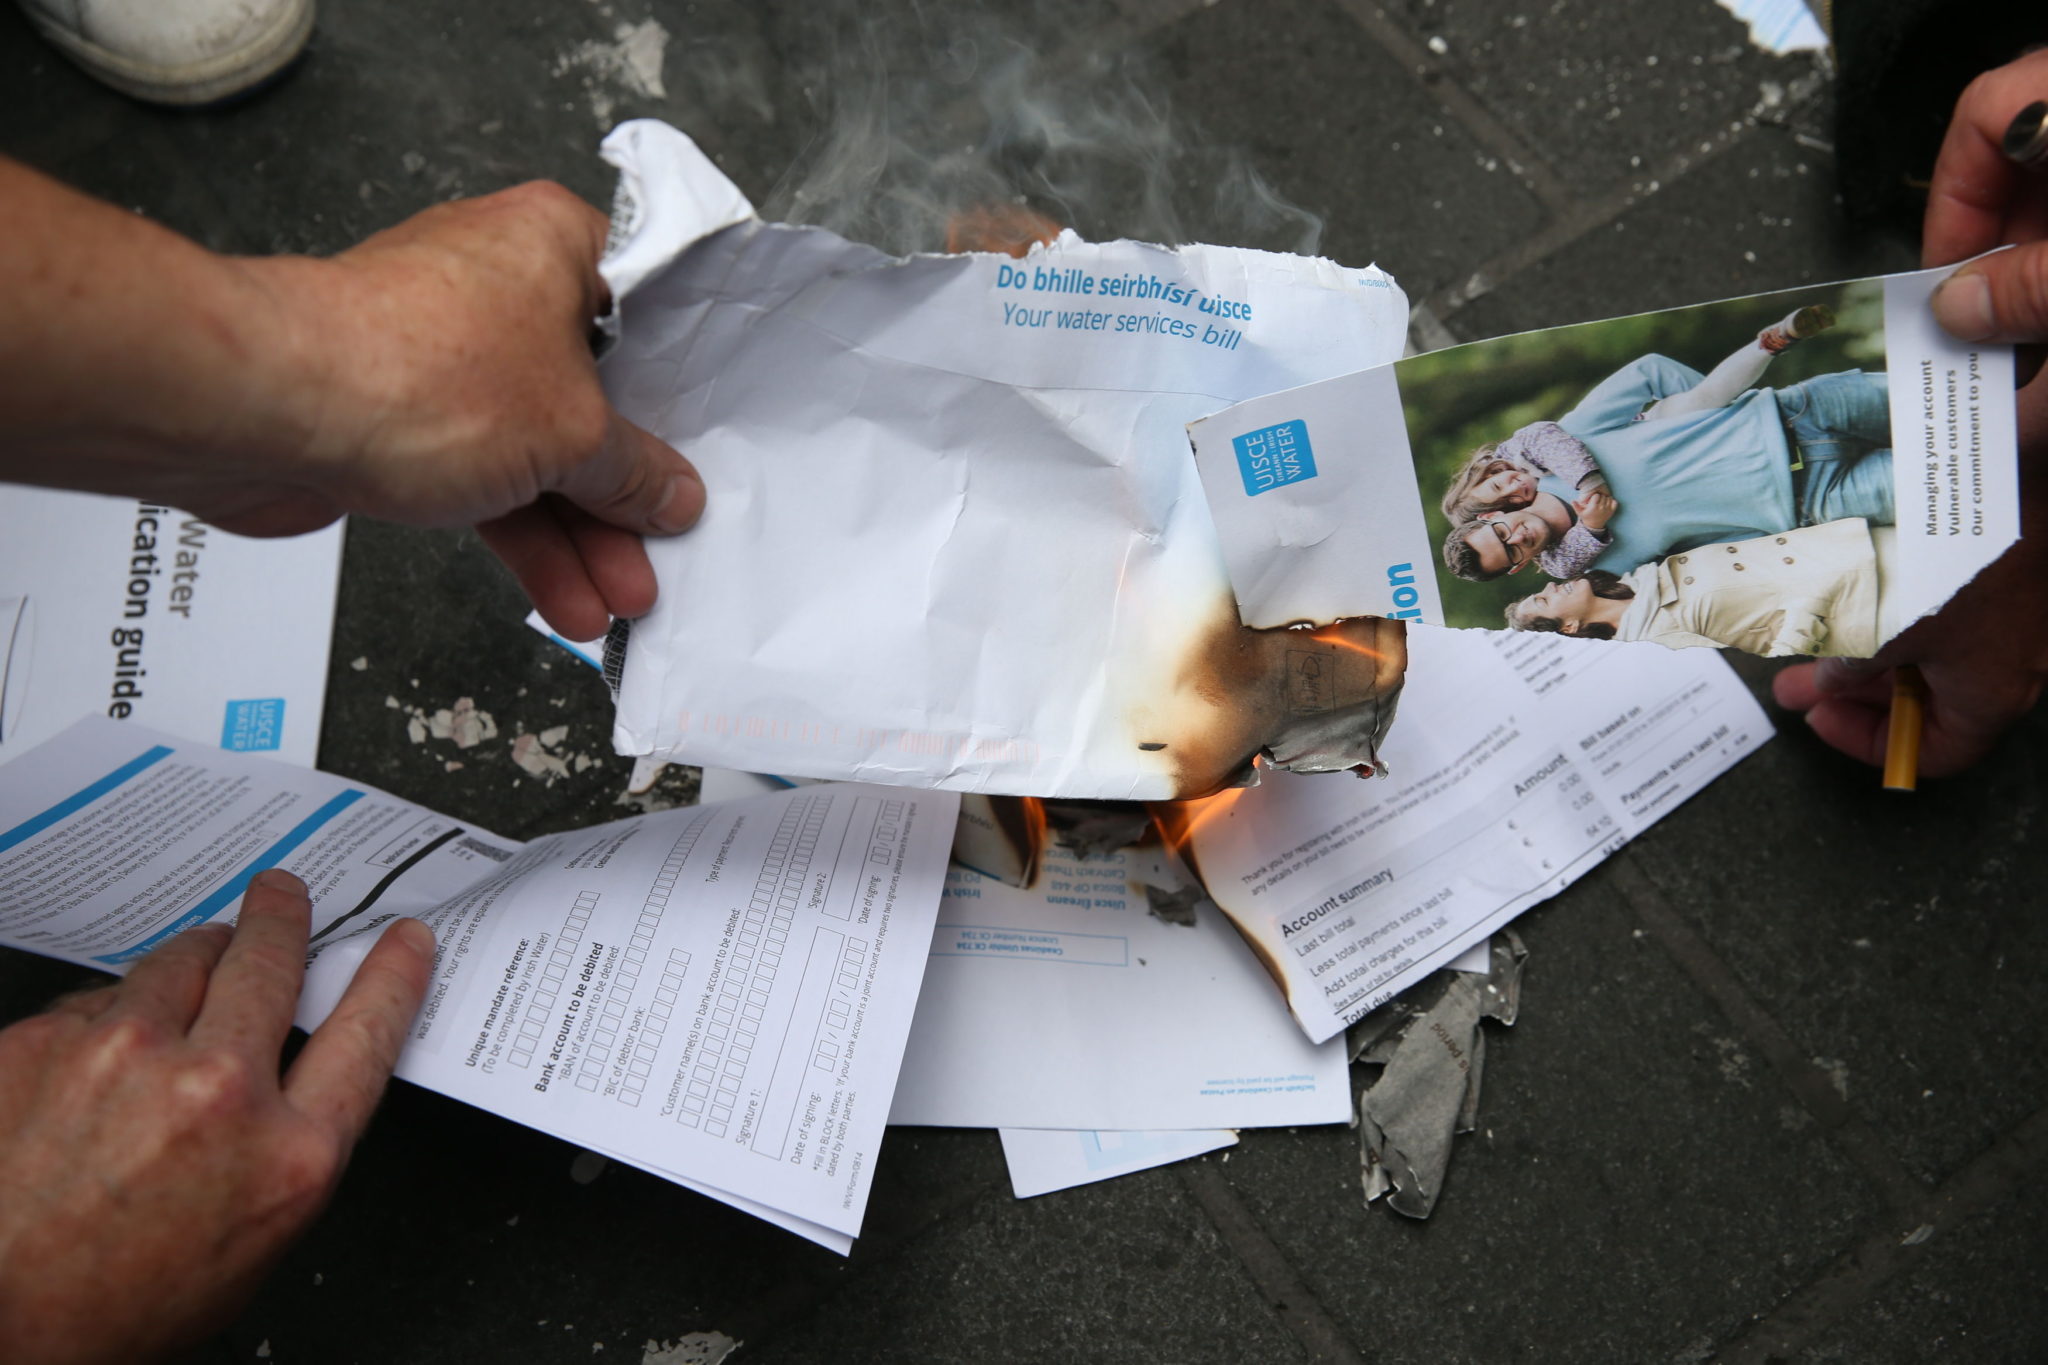 Protesters burn water bills on O'Connell Street in Dublin, during a demonstration against water charges in January 2015